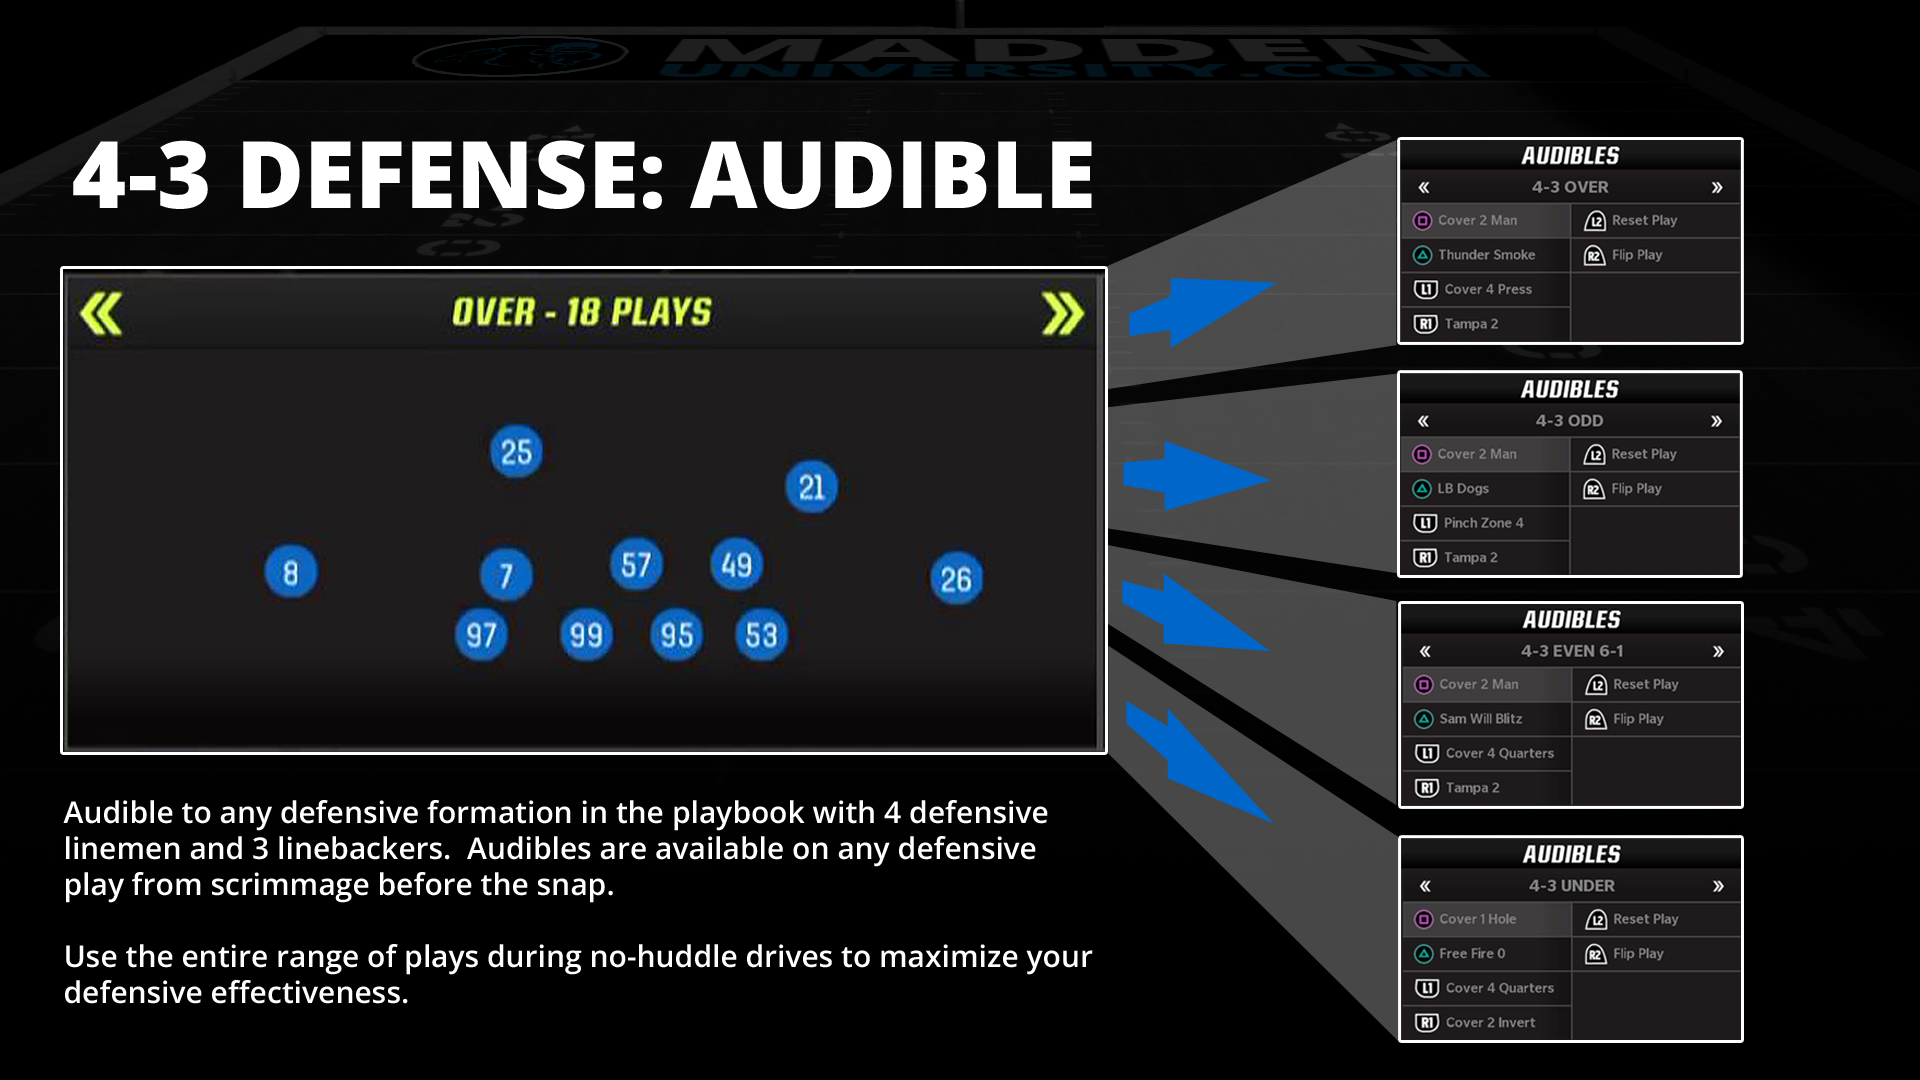 Audible to any formation in the playbook with 4 defensive linemen and 3 linebackers.  Audibles are available onany defensive play before the snap.  Use the entire range of plays during no-huddle drives to maximize defenisve efficiency.  